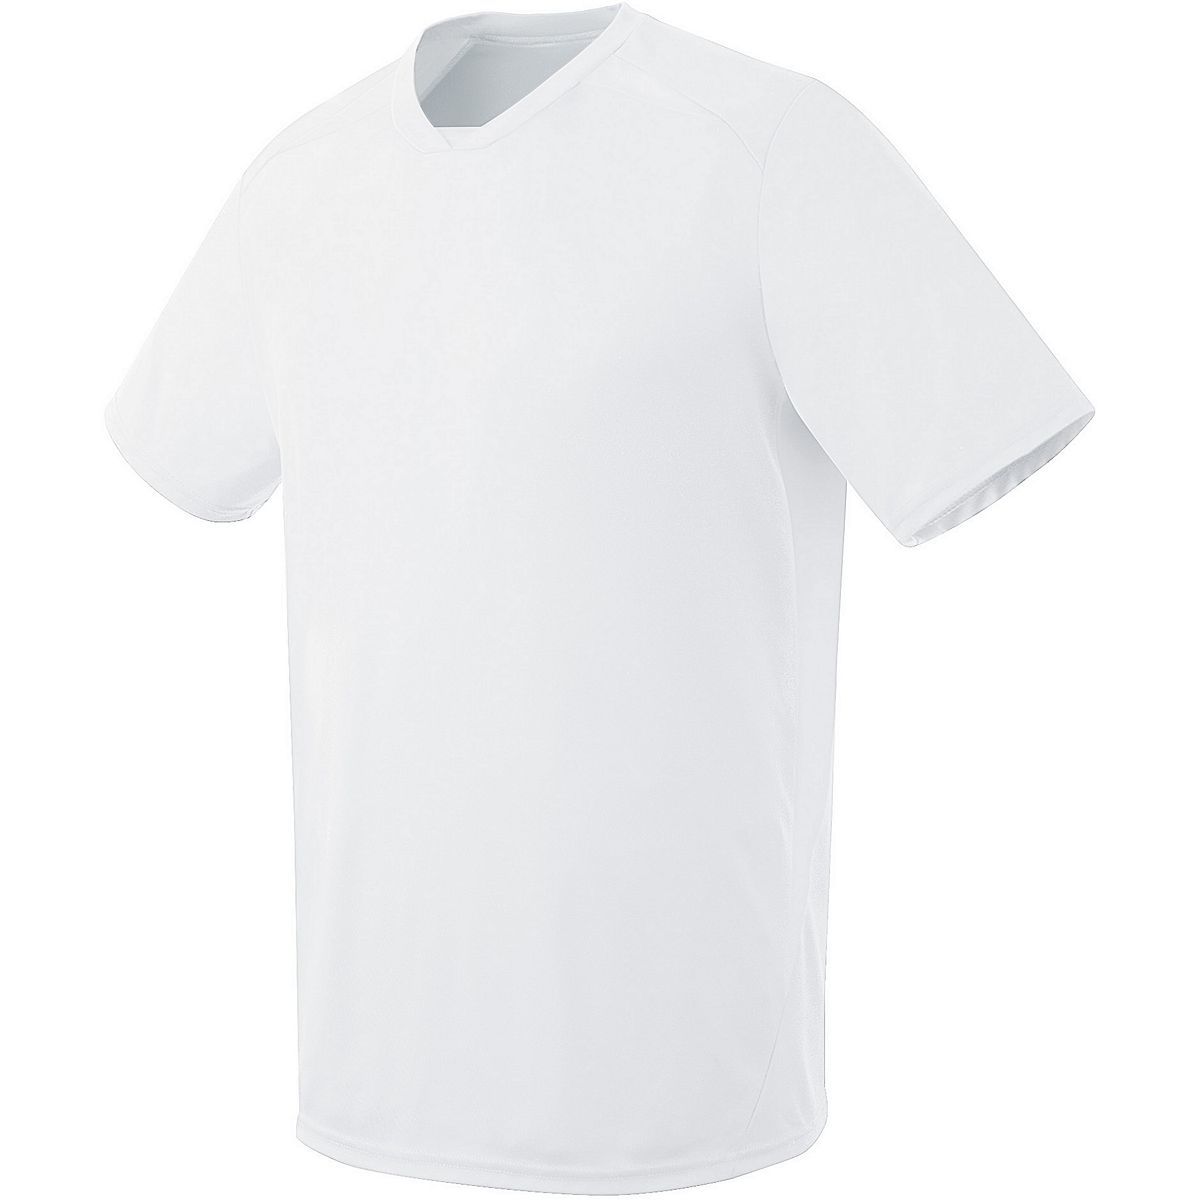 High 5 Adult Hawk Jersey in White/White  -Part of the Adult, Adult-Jersey, High5-Products, Soccer, Shirts, All-Sports-1 product lines at KanaleyCreations.com